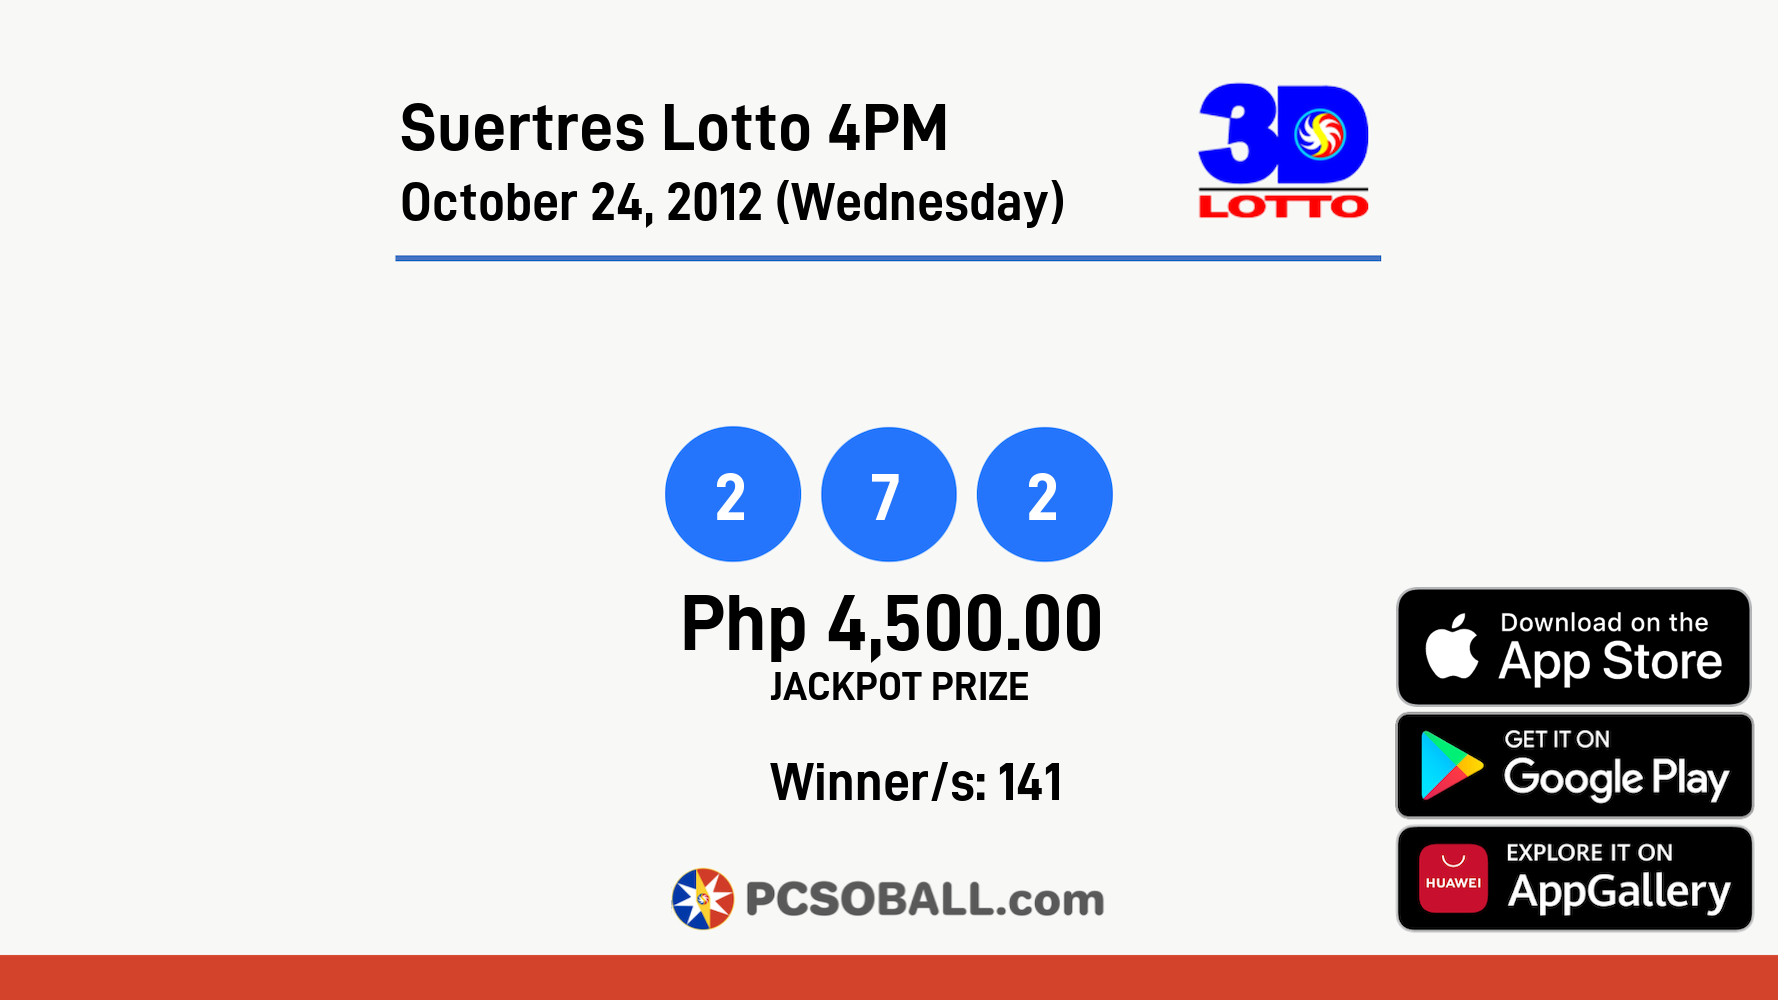 Suertres Lotto 4PM October 24, 2012 (Wednesday) Result